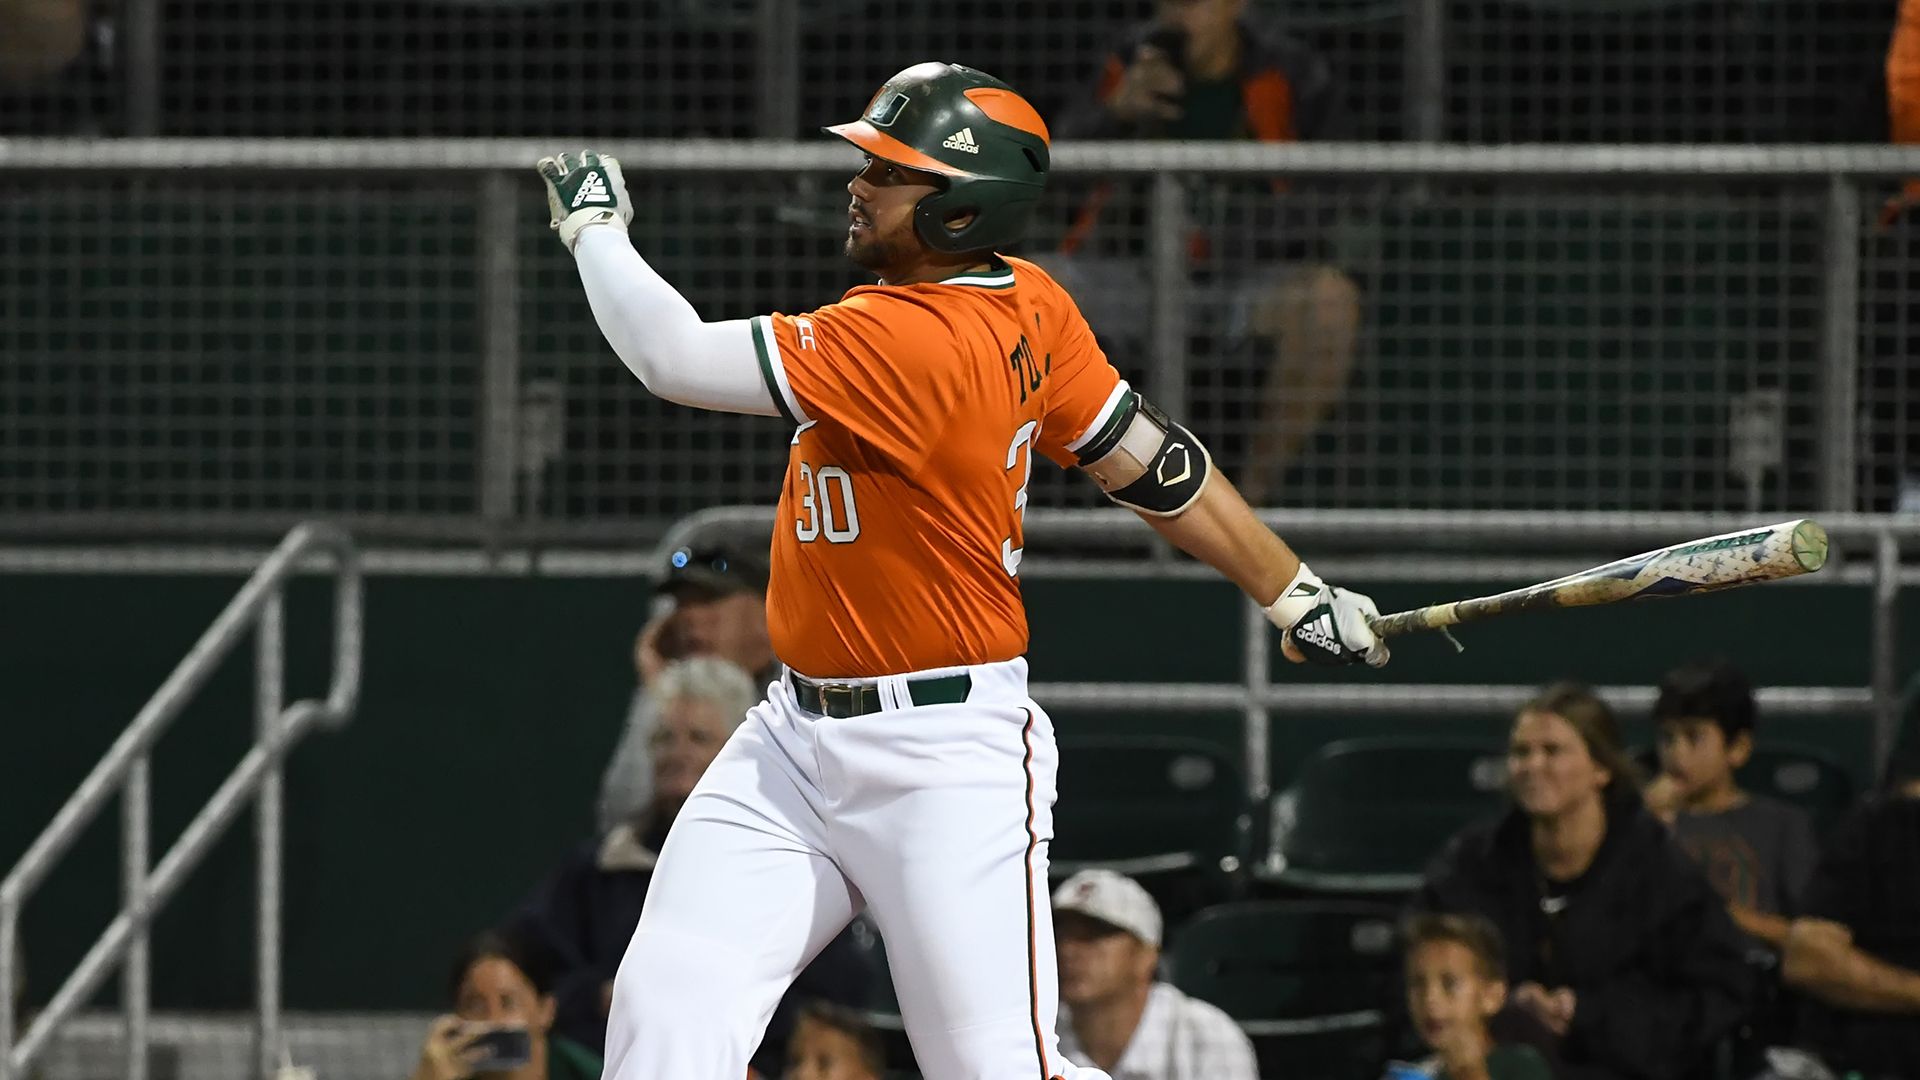 Miami Falls in Extras to UNC at ACC Tourney, 7-5